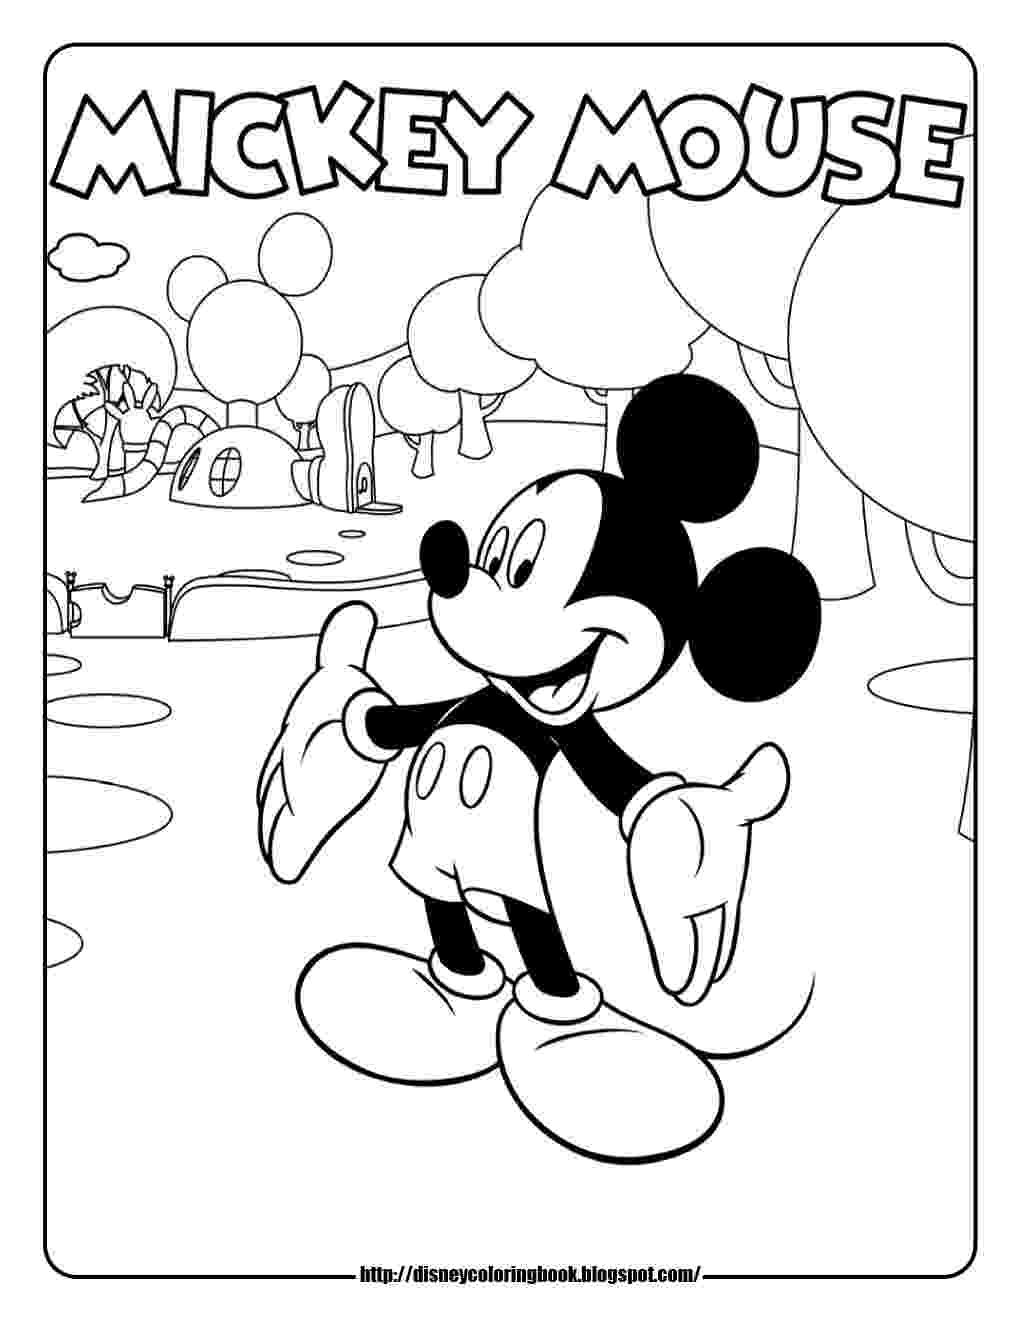 mickey mouse clubhouse coloring page mickey mouse clubhouse 1 free disney coloring sheets page coloring mouse clubhouse mickey 